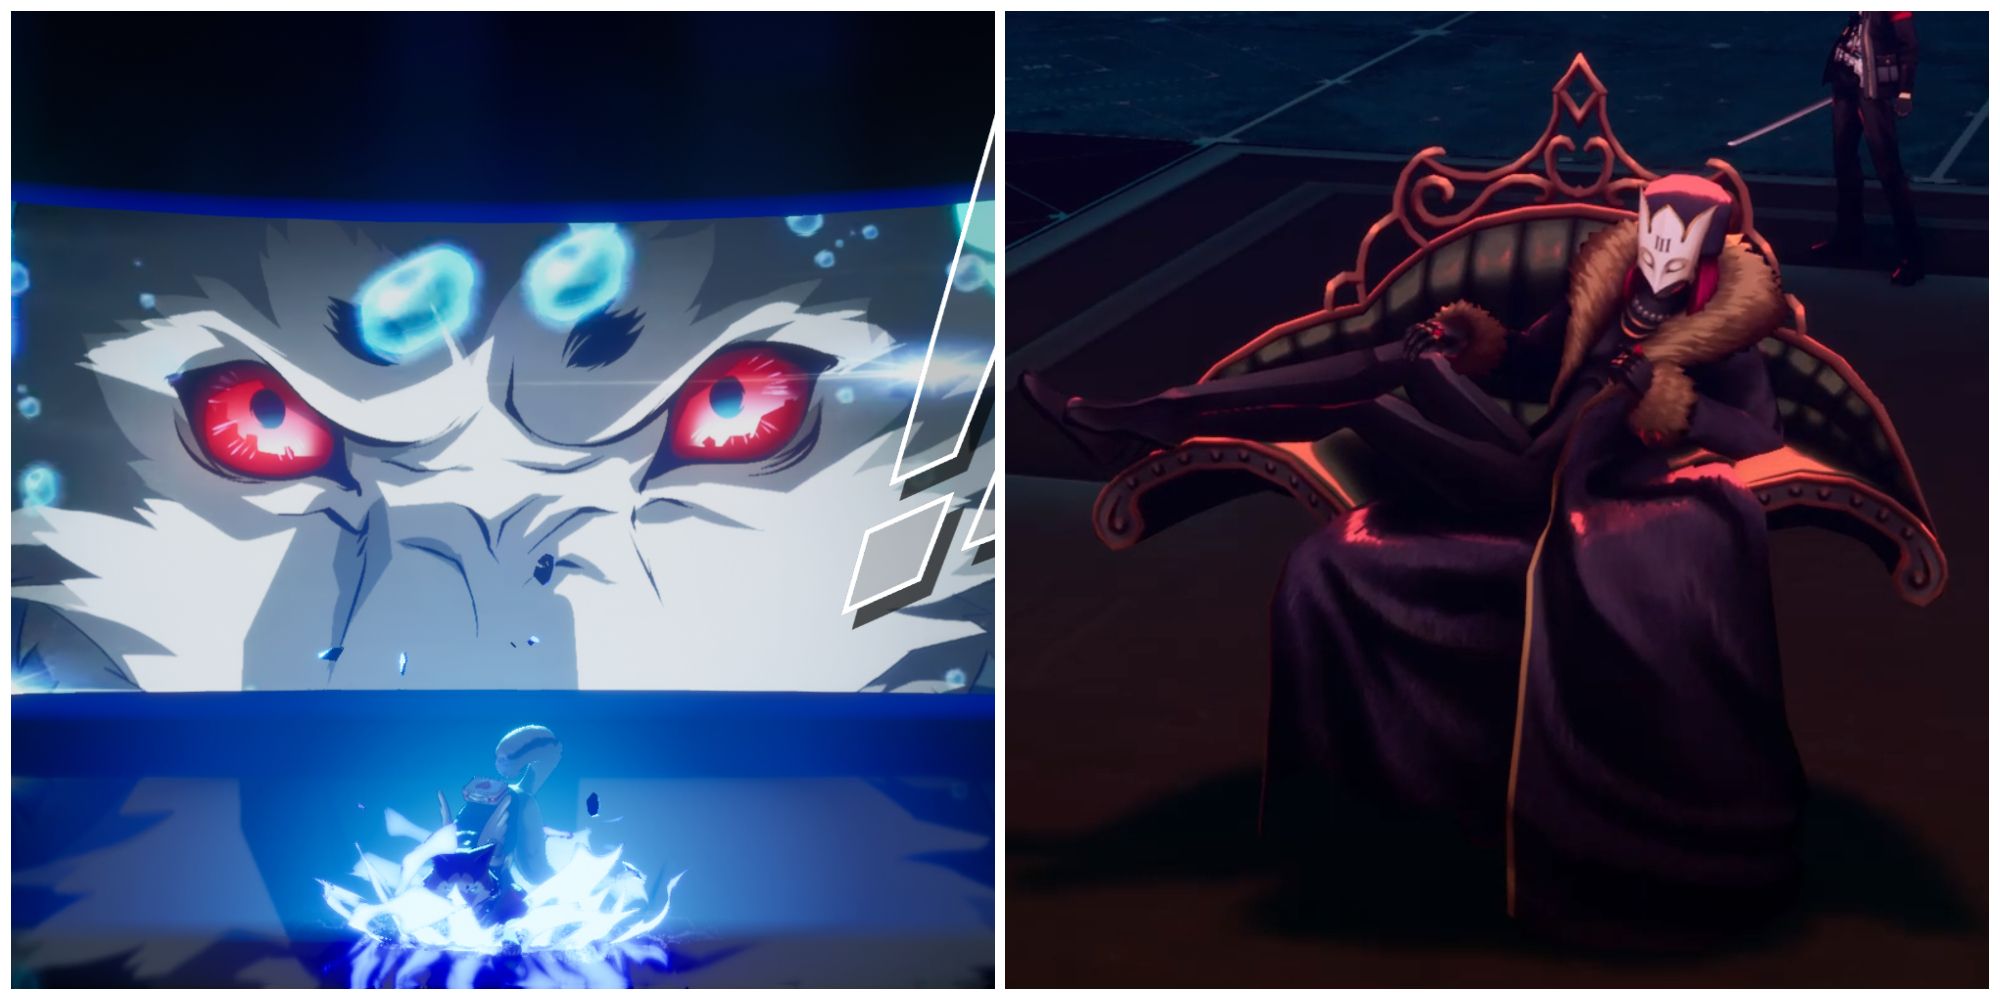 Split image of Koromaru using his Theurgy attack, and the Elegant Mother boss in Persona 3 Reload